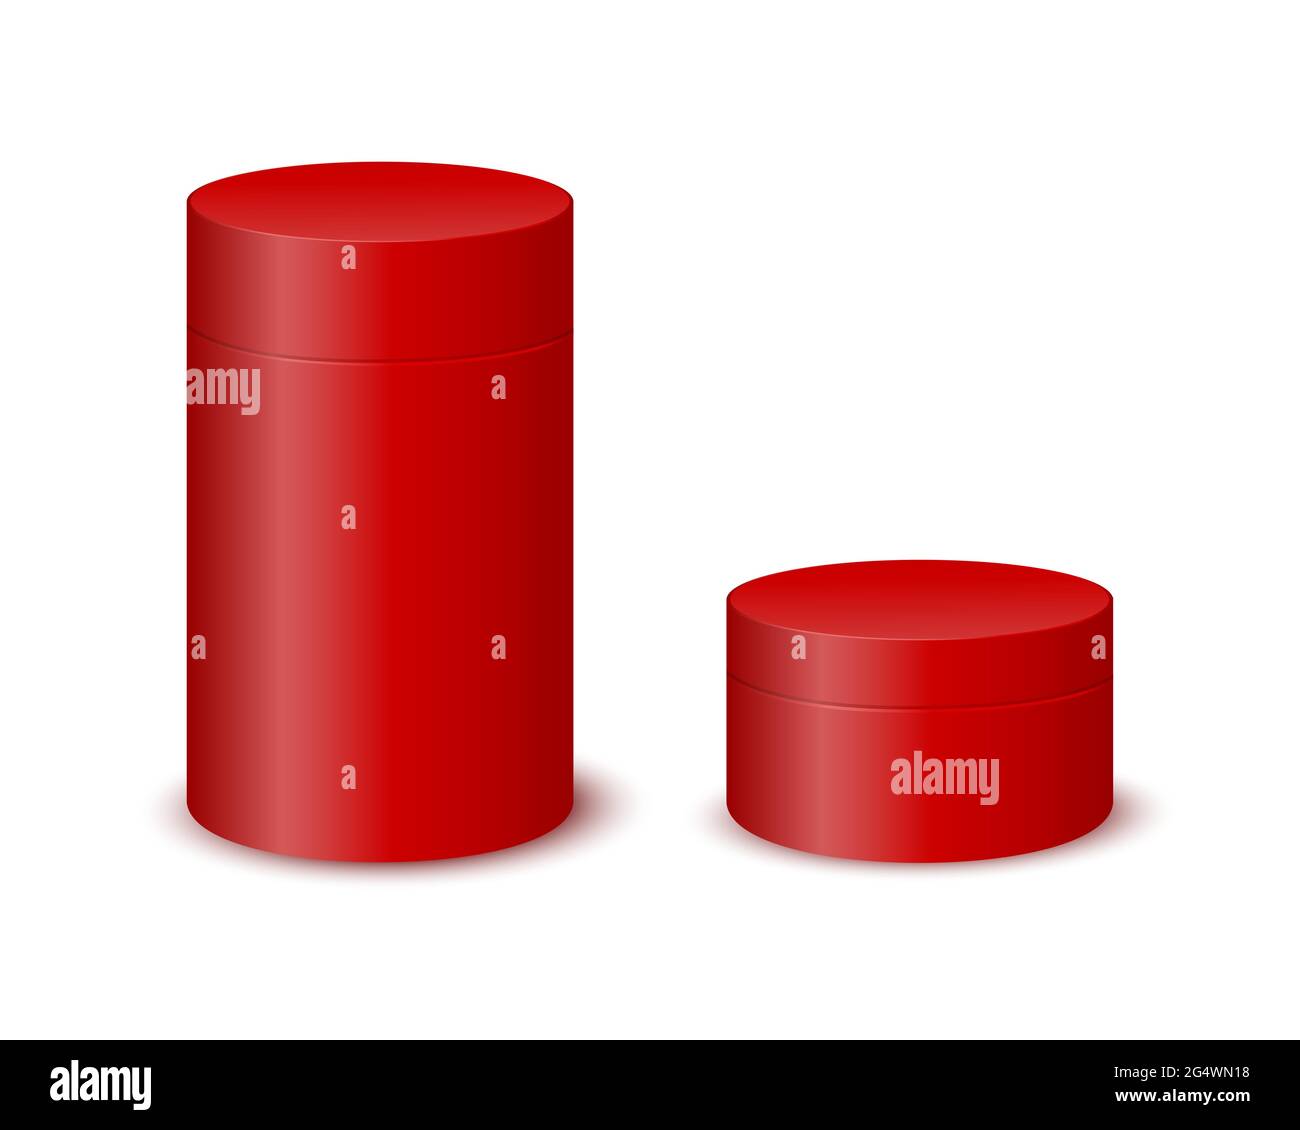 Red tube boxes isolated on white background. Cylinder cardboard, plastic or metal package mockup for product design. Blank containers for gifts, food, tea, hats. Vector realistic illustration. Stock Vector